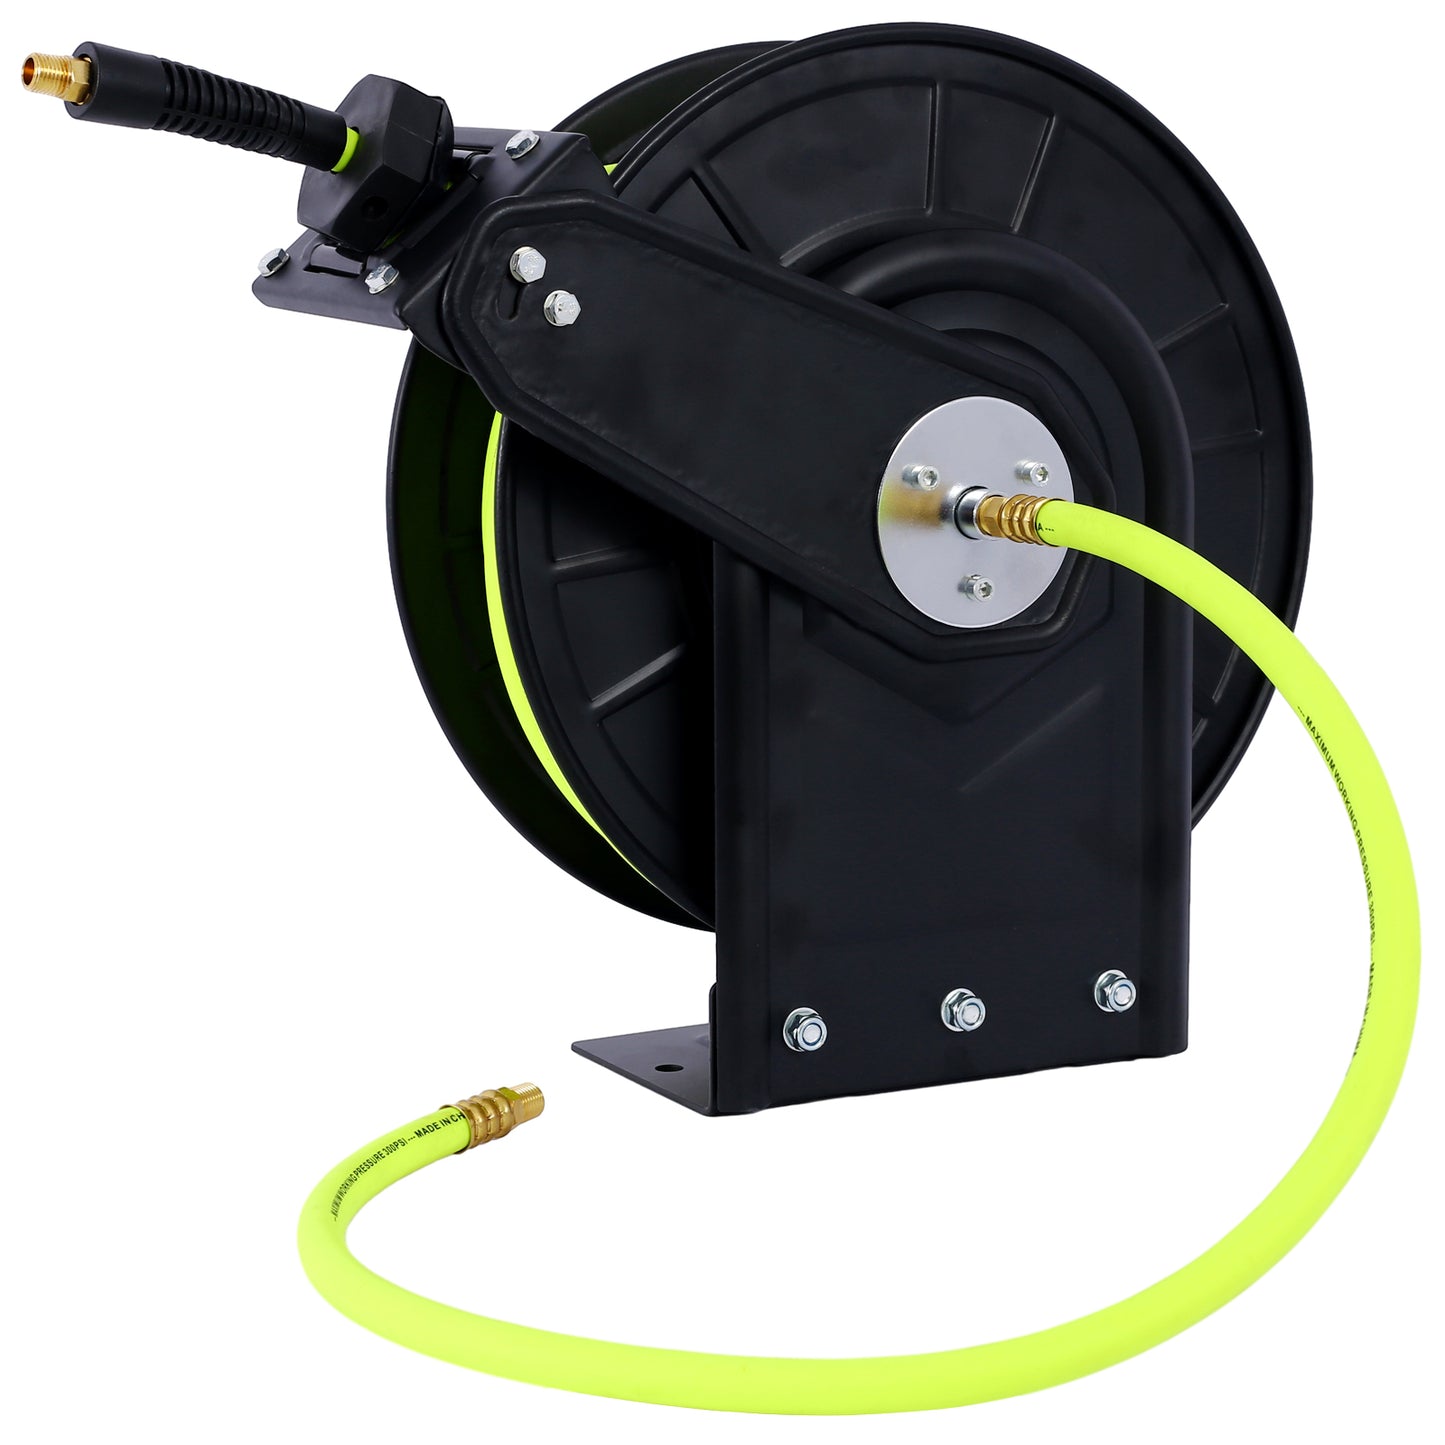 Retractable Air Hose Reel With 3/8" Inch x 50' Ft,Heavy Duty Steel Hose Reel Auto Rewind Pneumatic,Industrial Grade Rubber Hose,300 PSI,Black